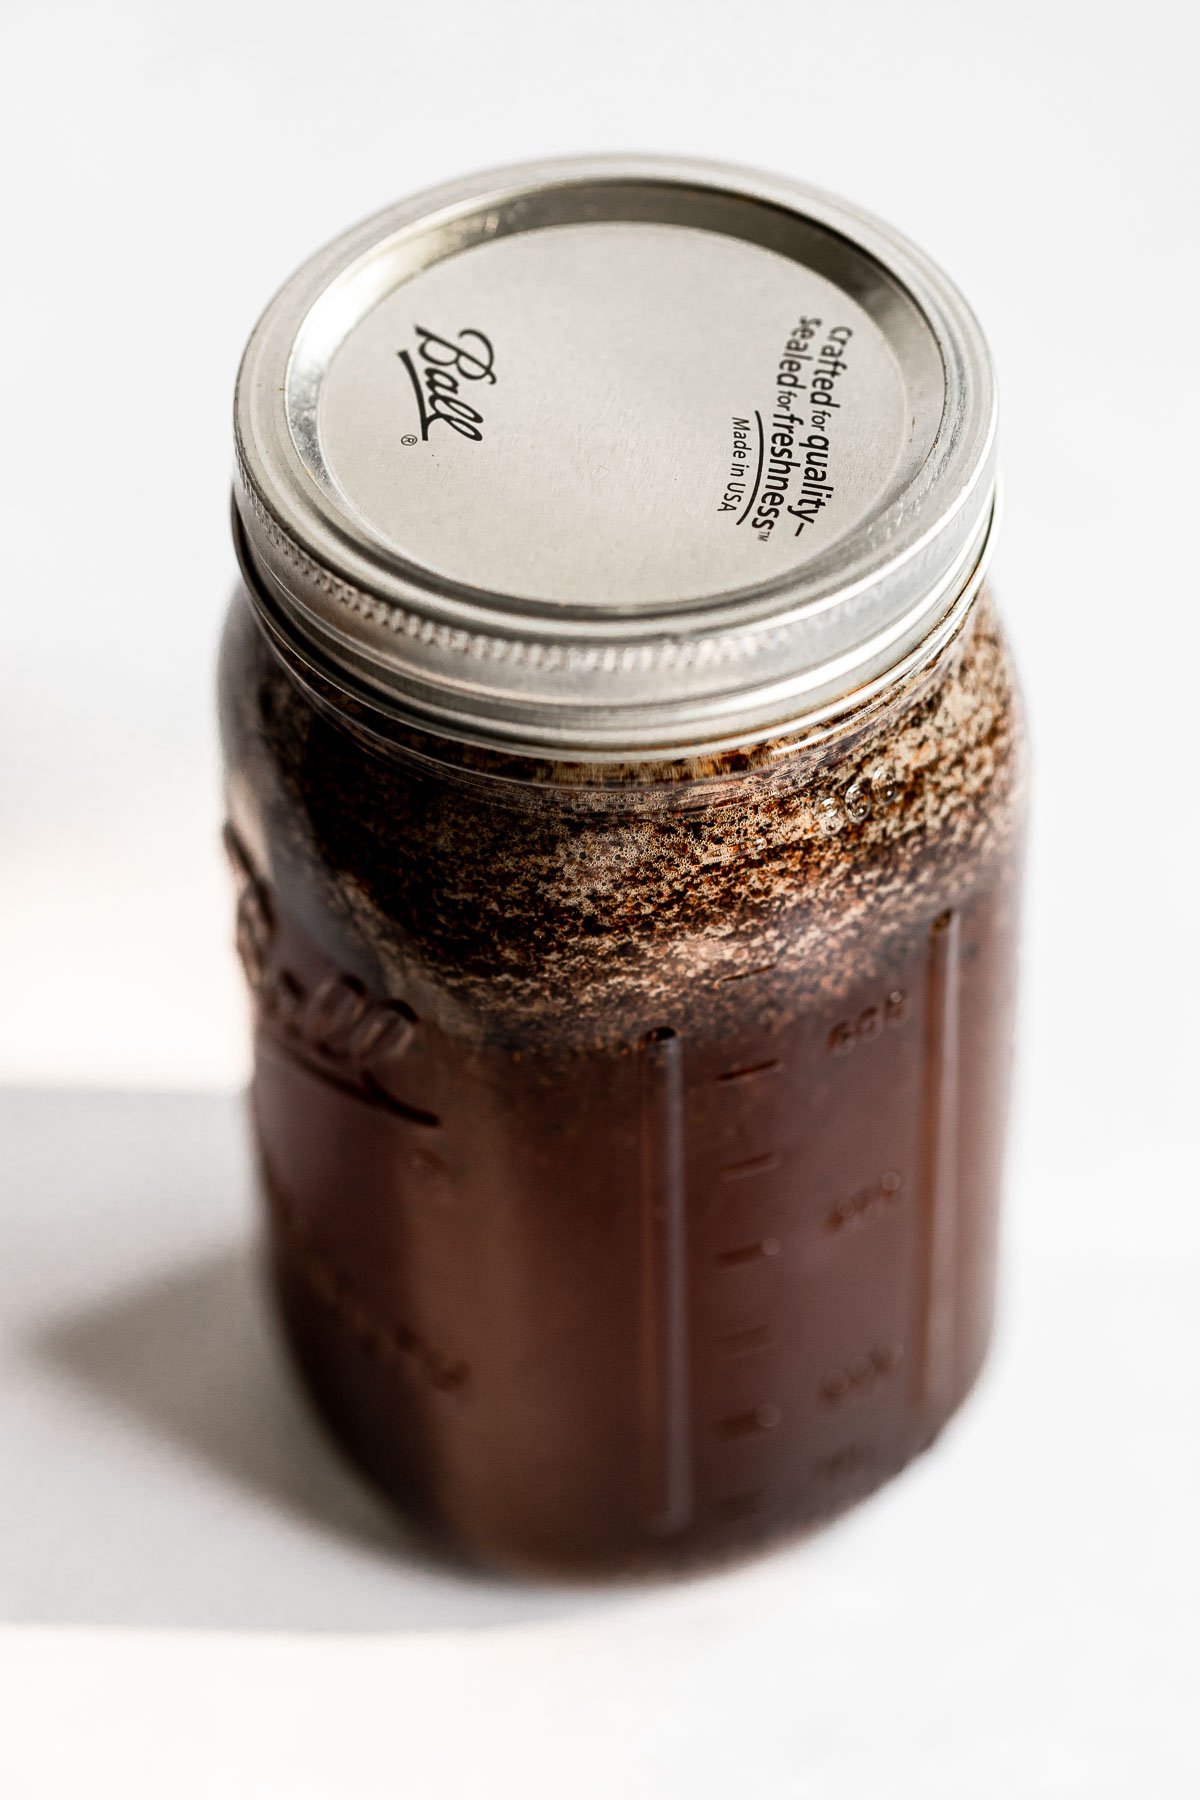 Jar with coffee grounds and water and lid on top.